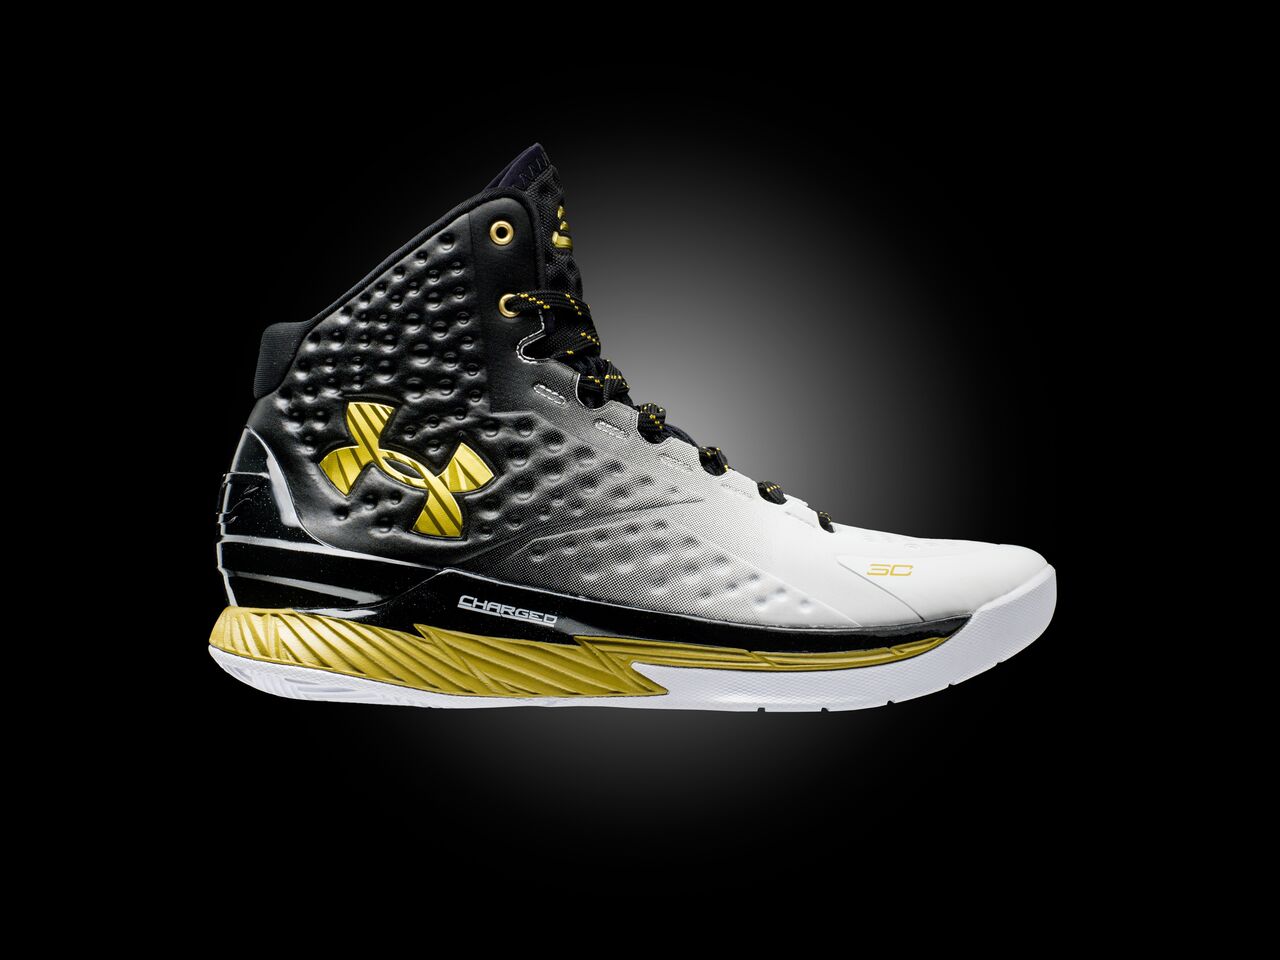 Under Armour Men's Curry 2 Basketball Shoes